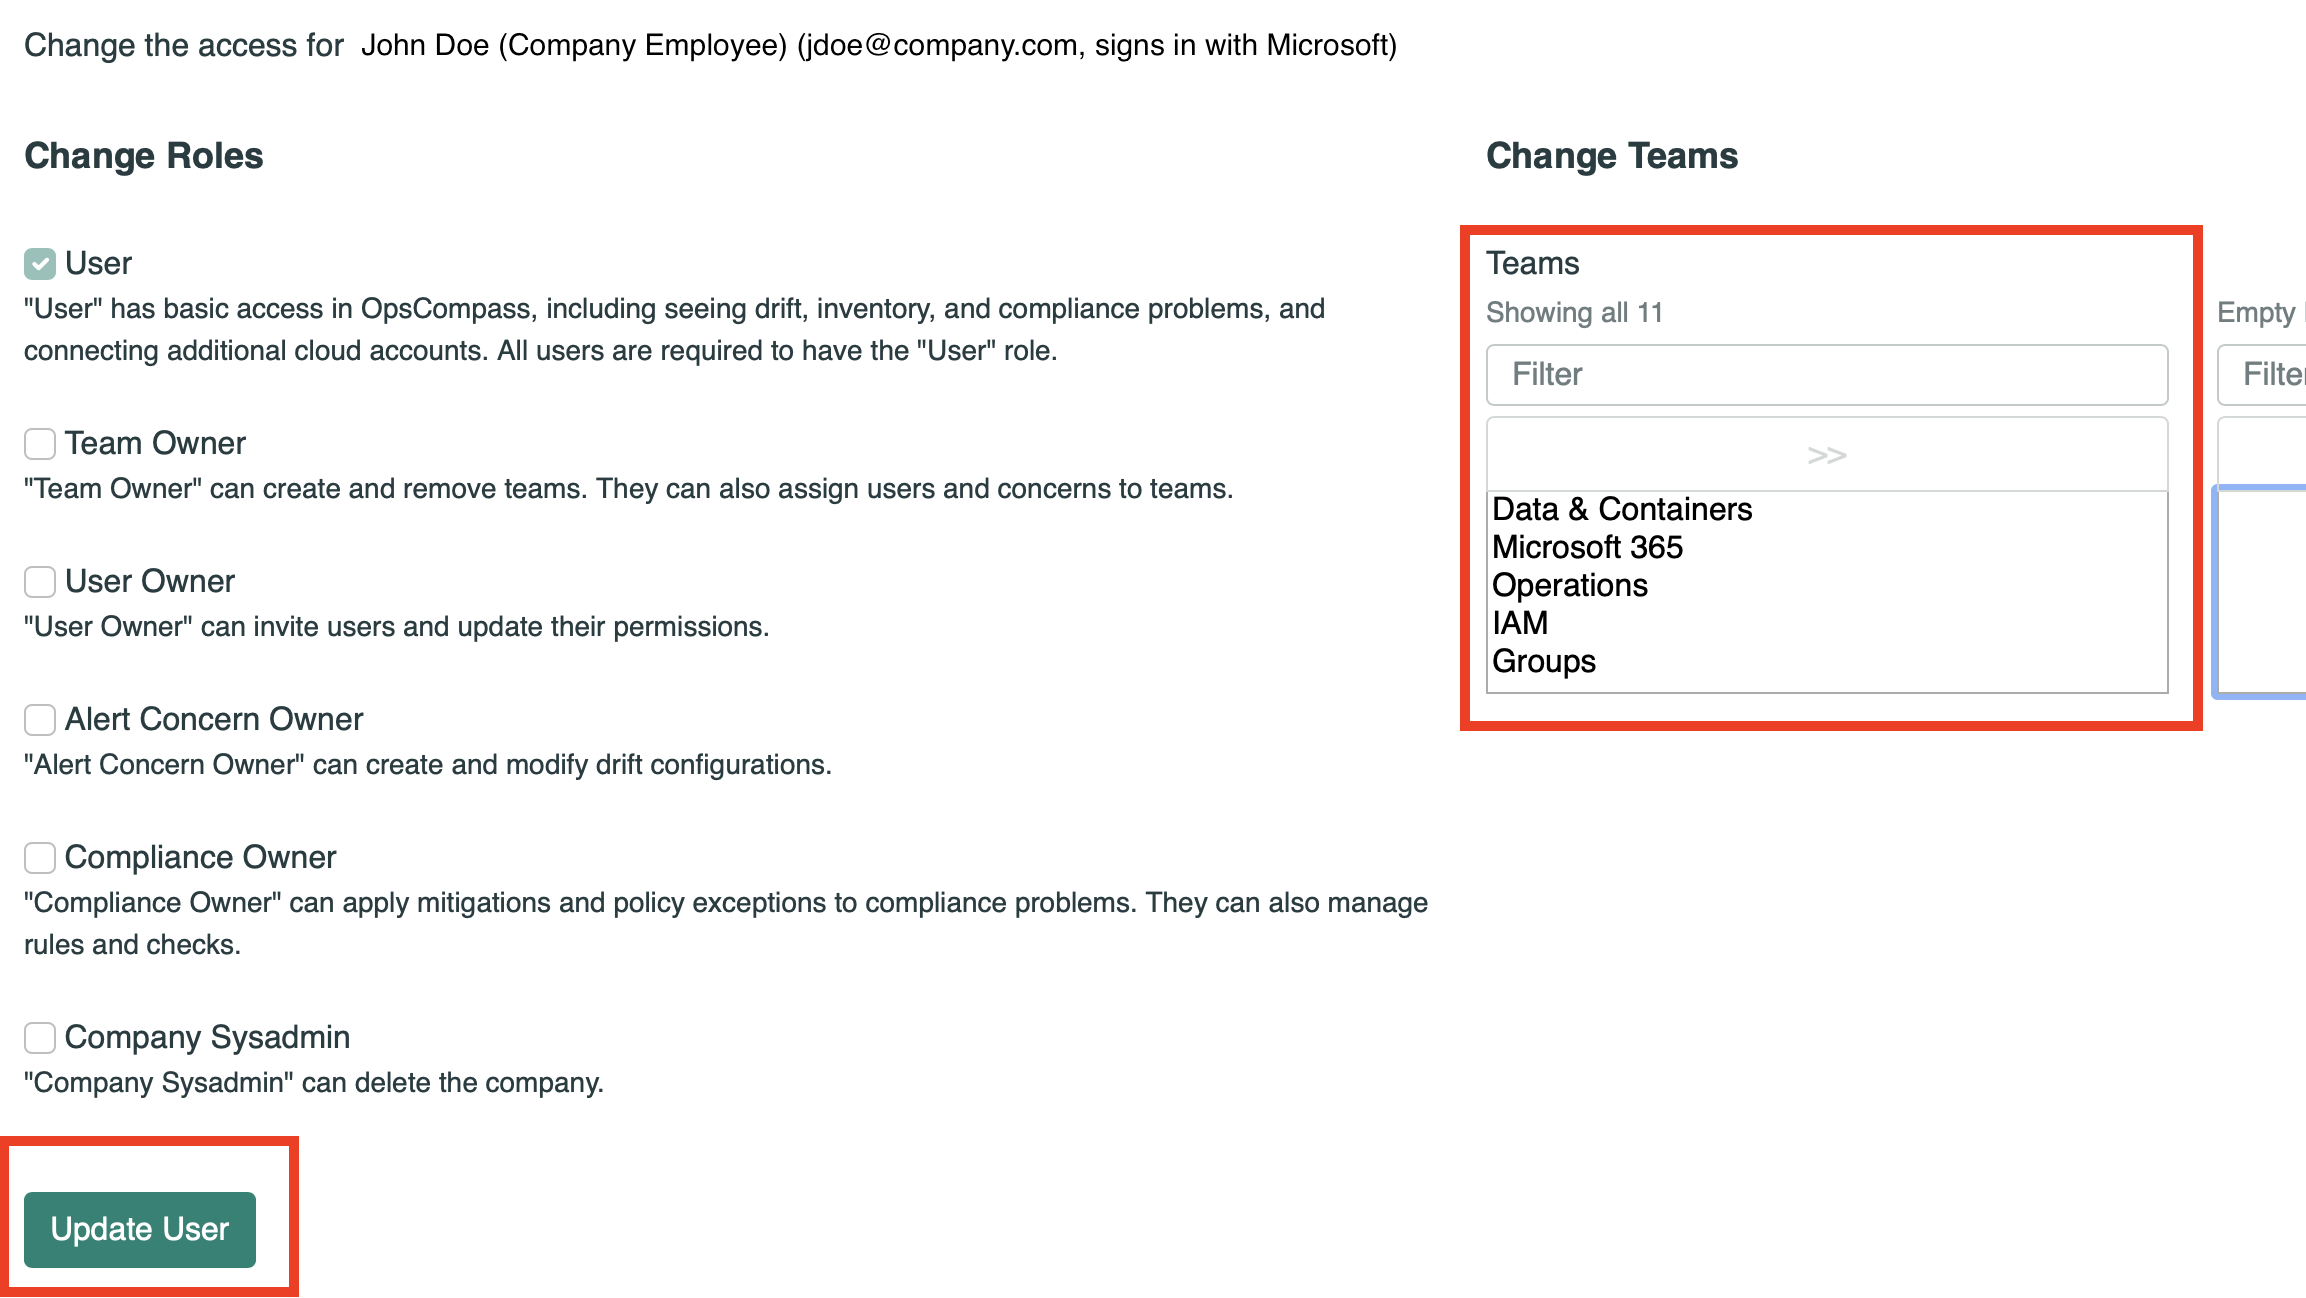 Image of the change roles page